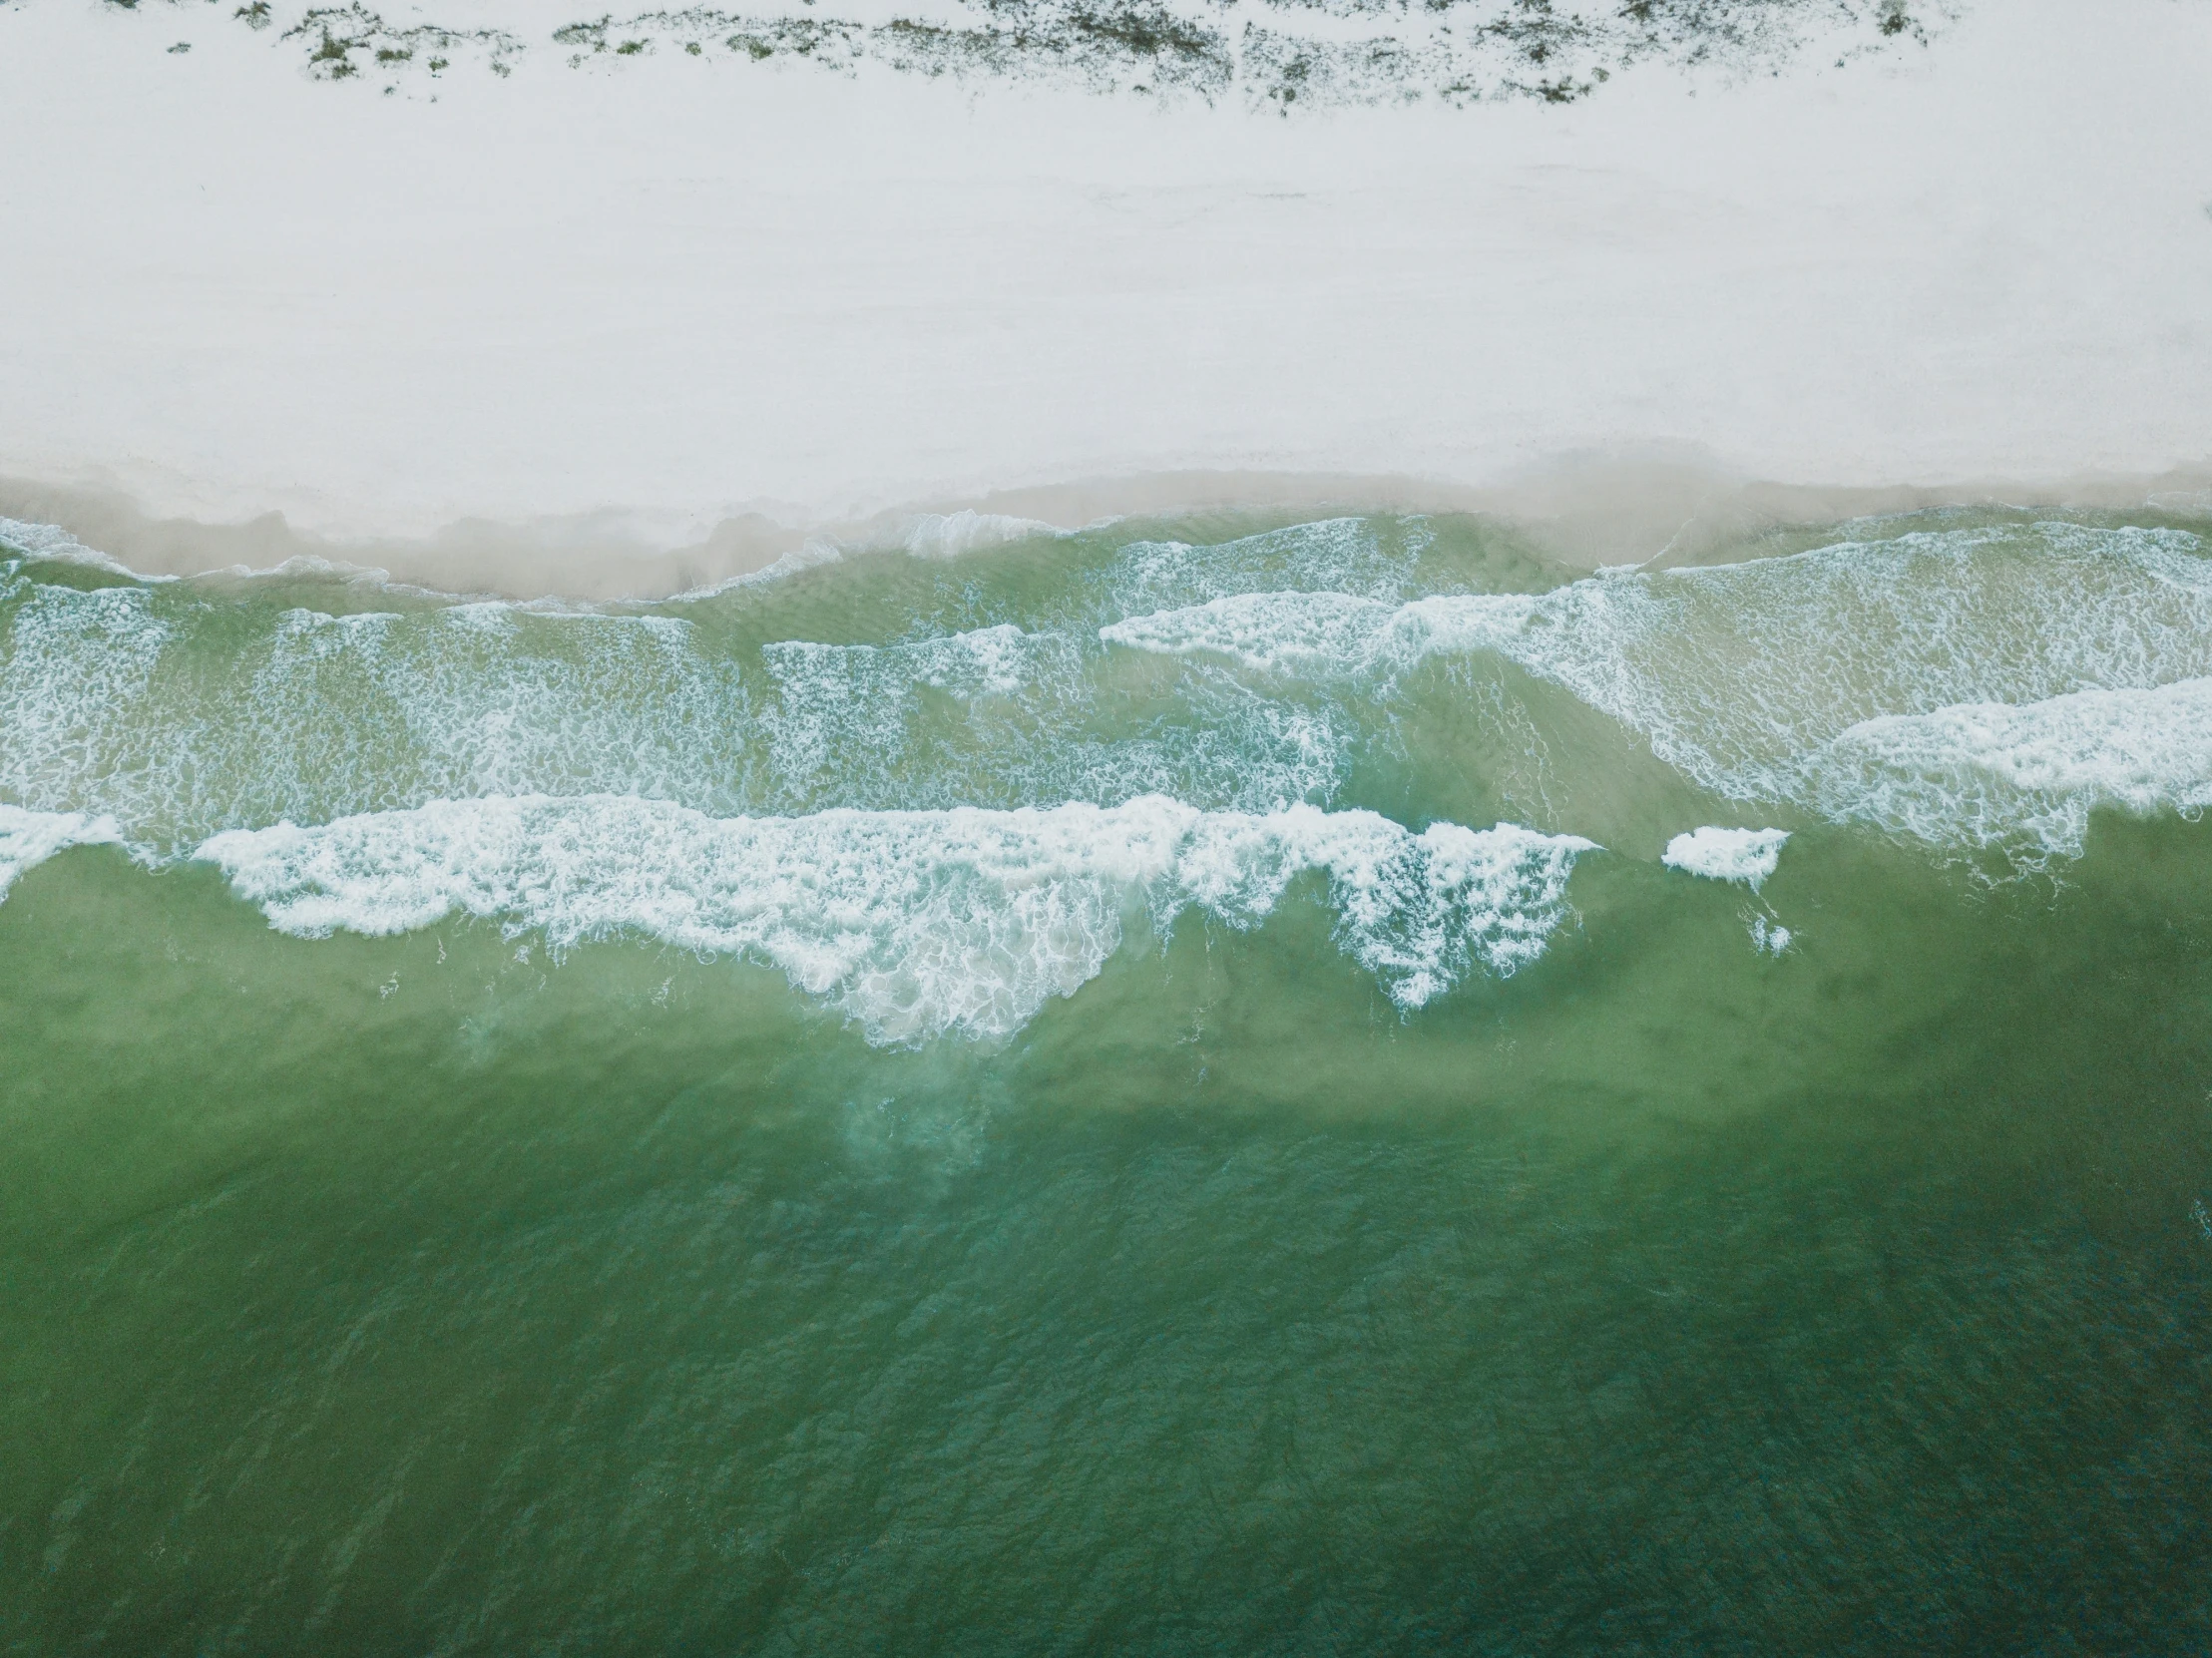 an aerial view of water and beach